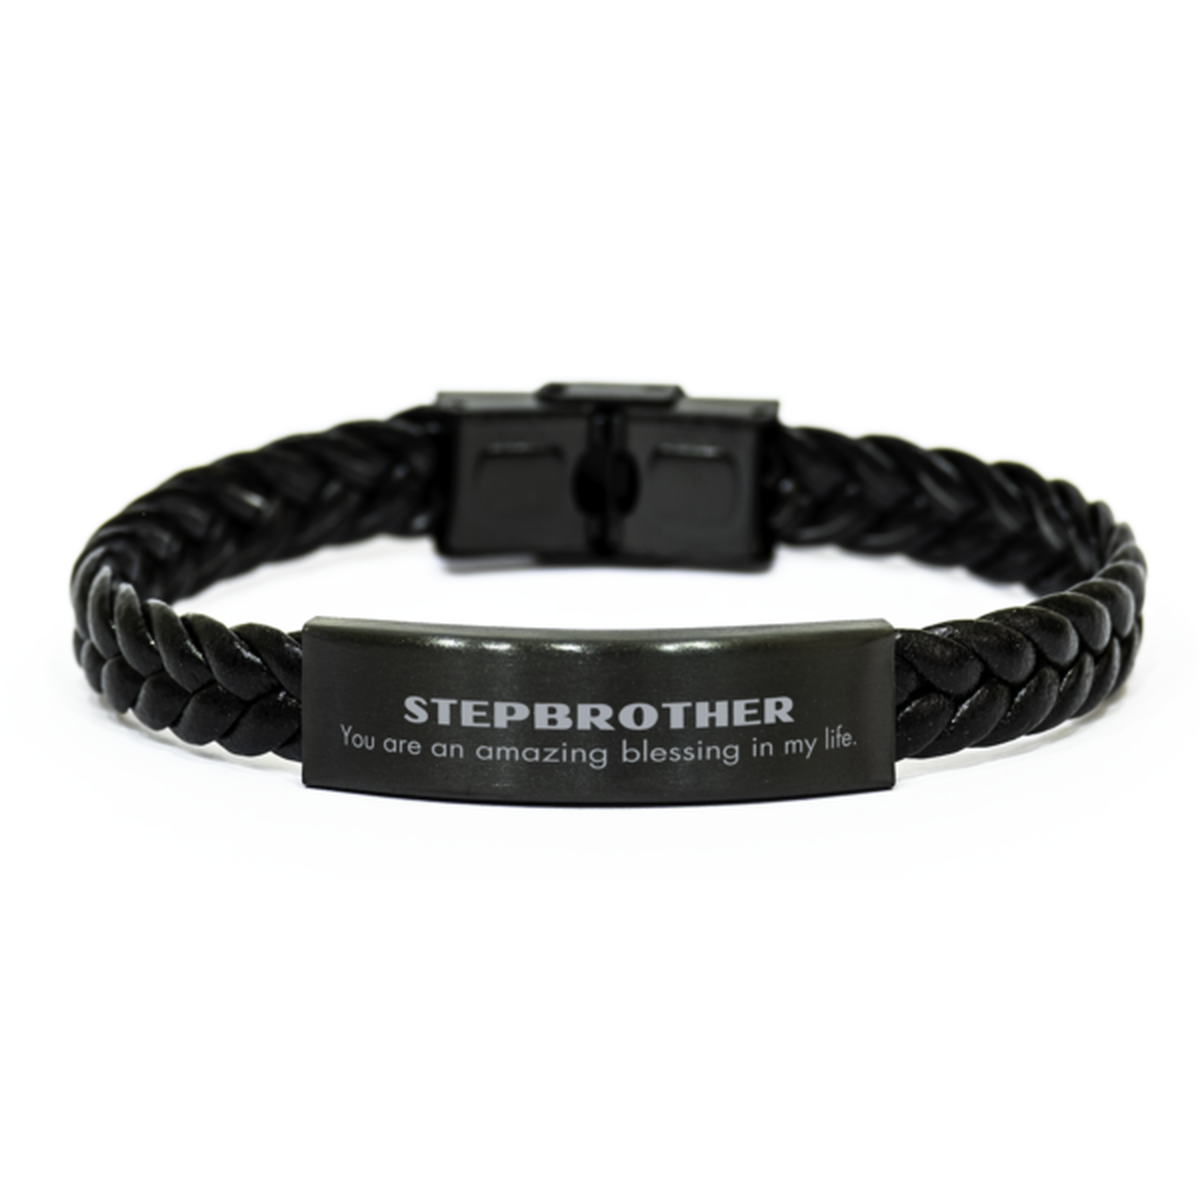 Stepbrother Braided Leather Bracelet, You are an amazing blessing in my life, Thank You Gifts For Stepbrother, Inspirational Birthday Christmas Unique Gifts For Stepbrother